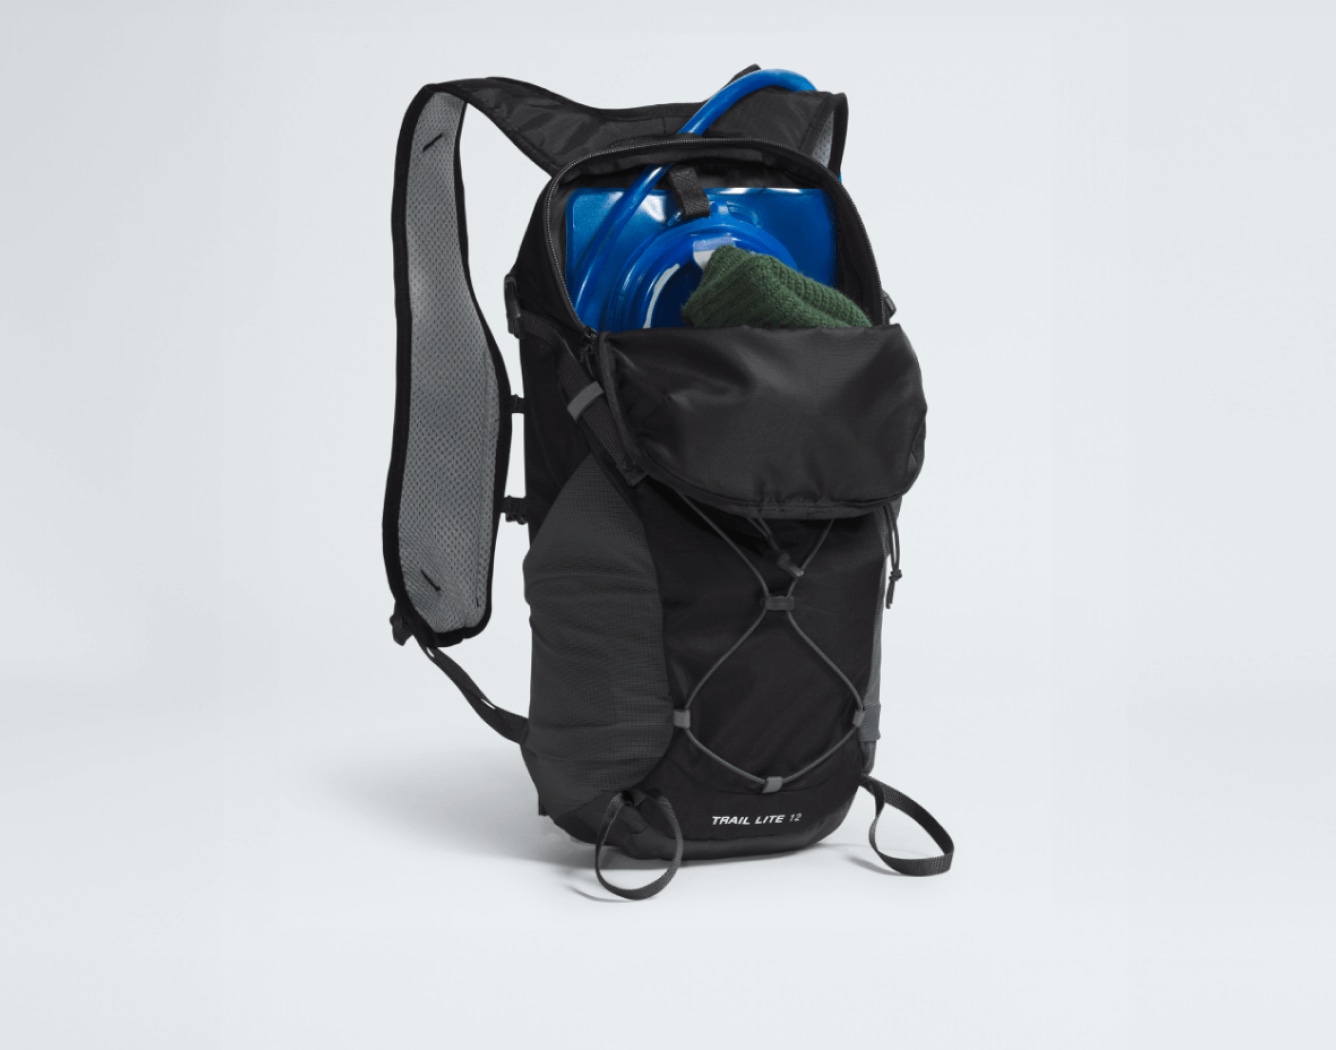 A studio image of a The North Face backpack.